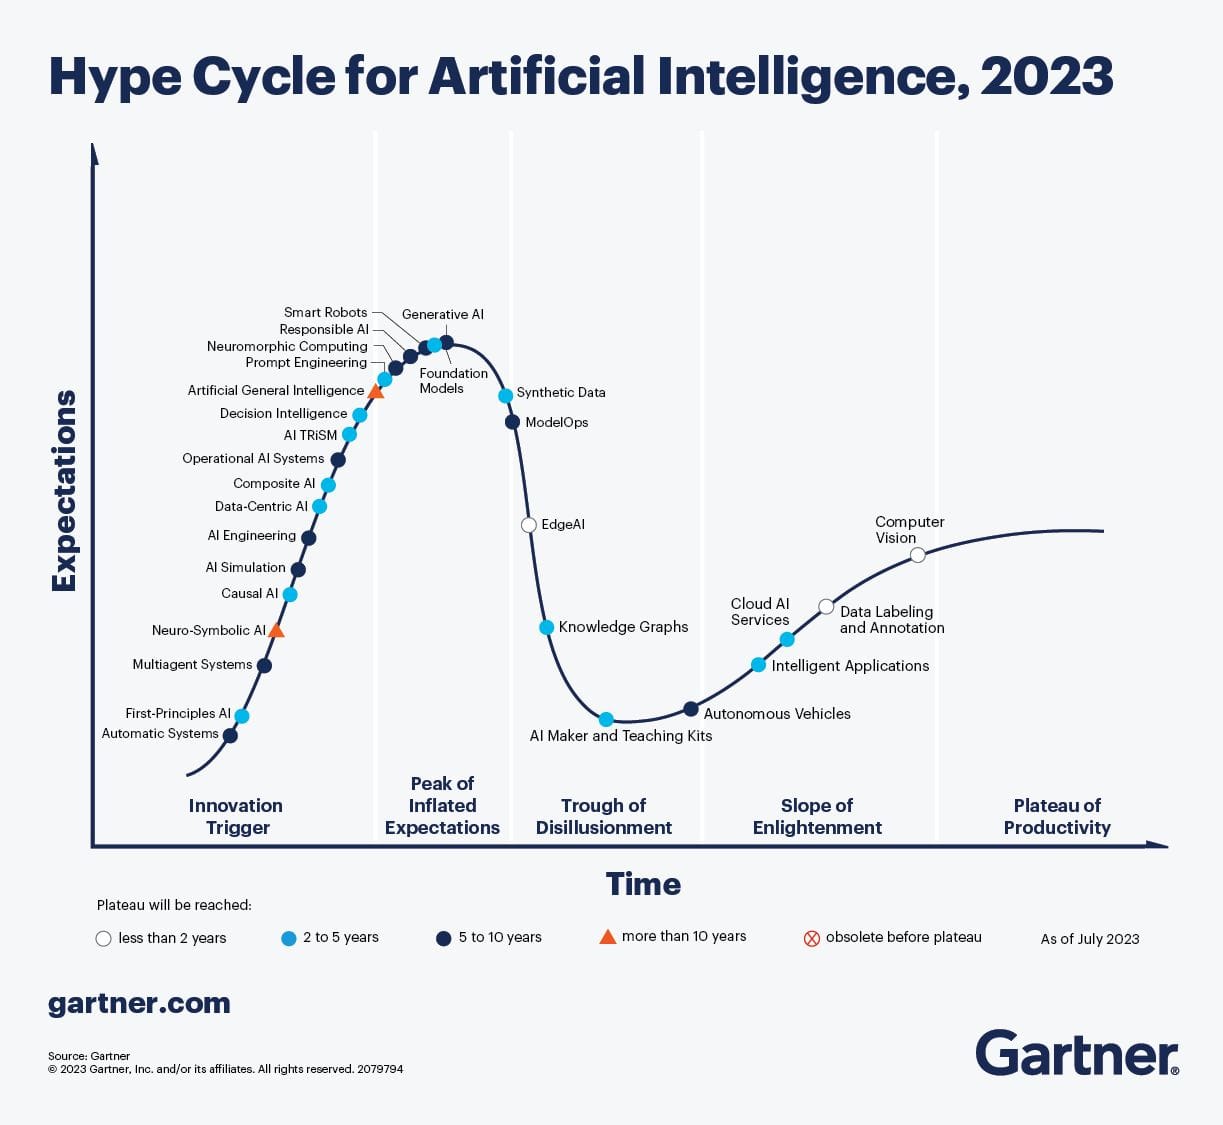 hype cycle for artificial intelligence 2023 by gartner